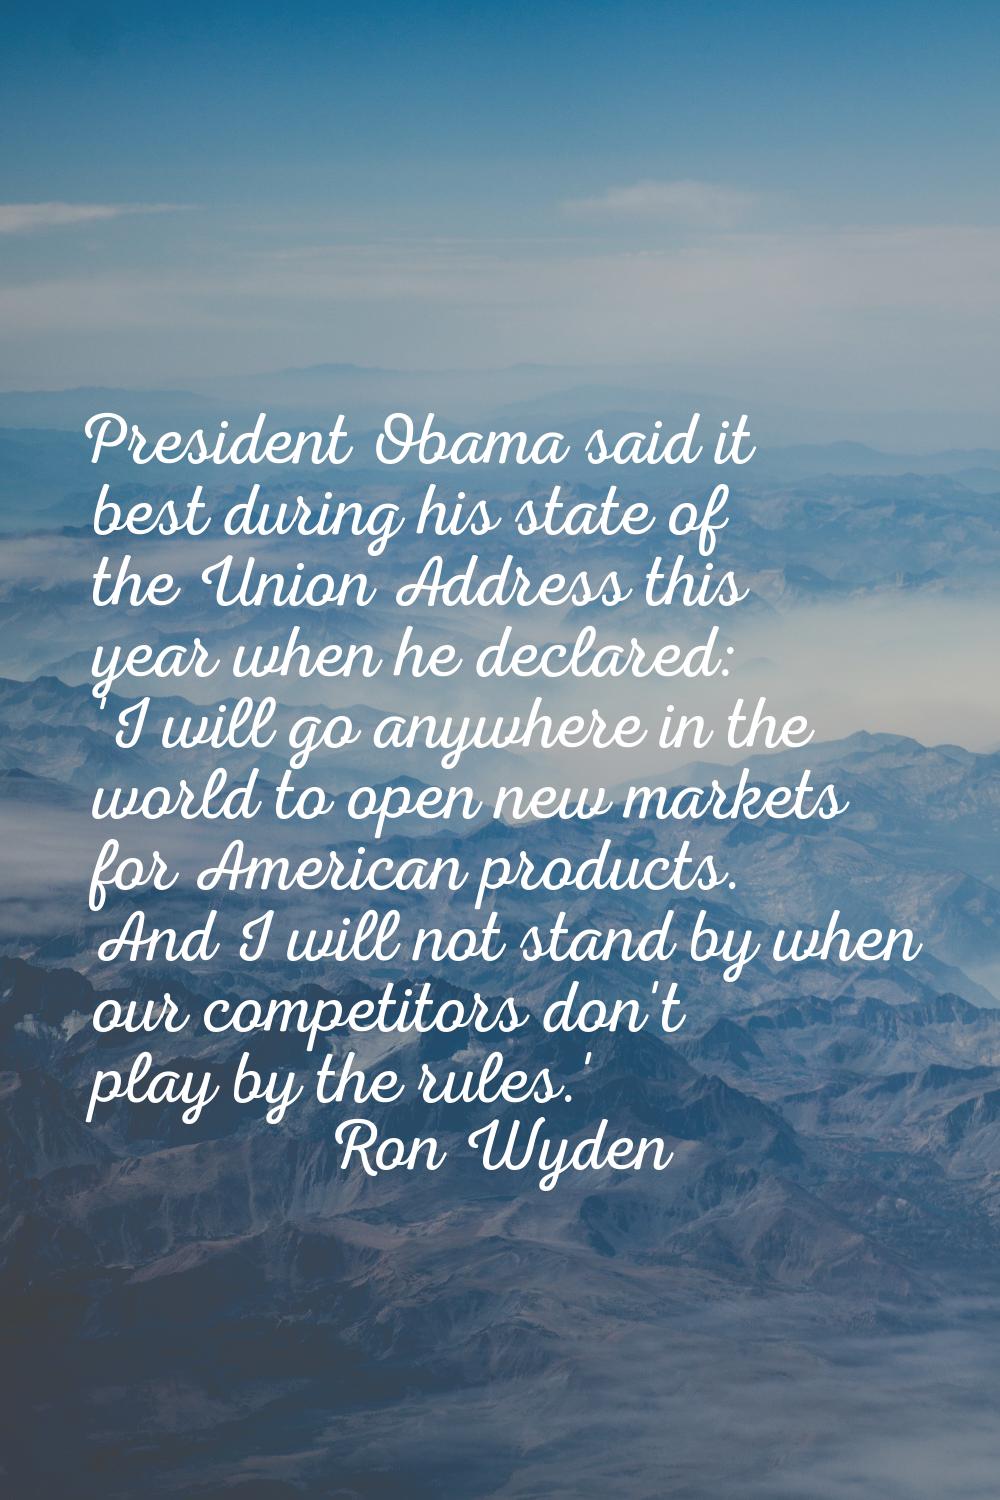 President Obama said it best during his state of the Union Address this year when he declared: 'I w